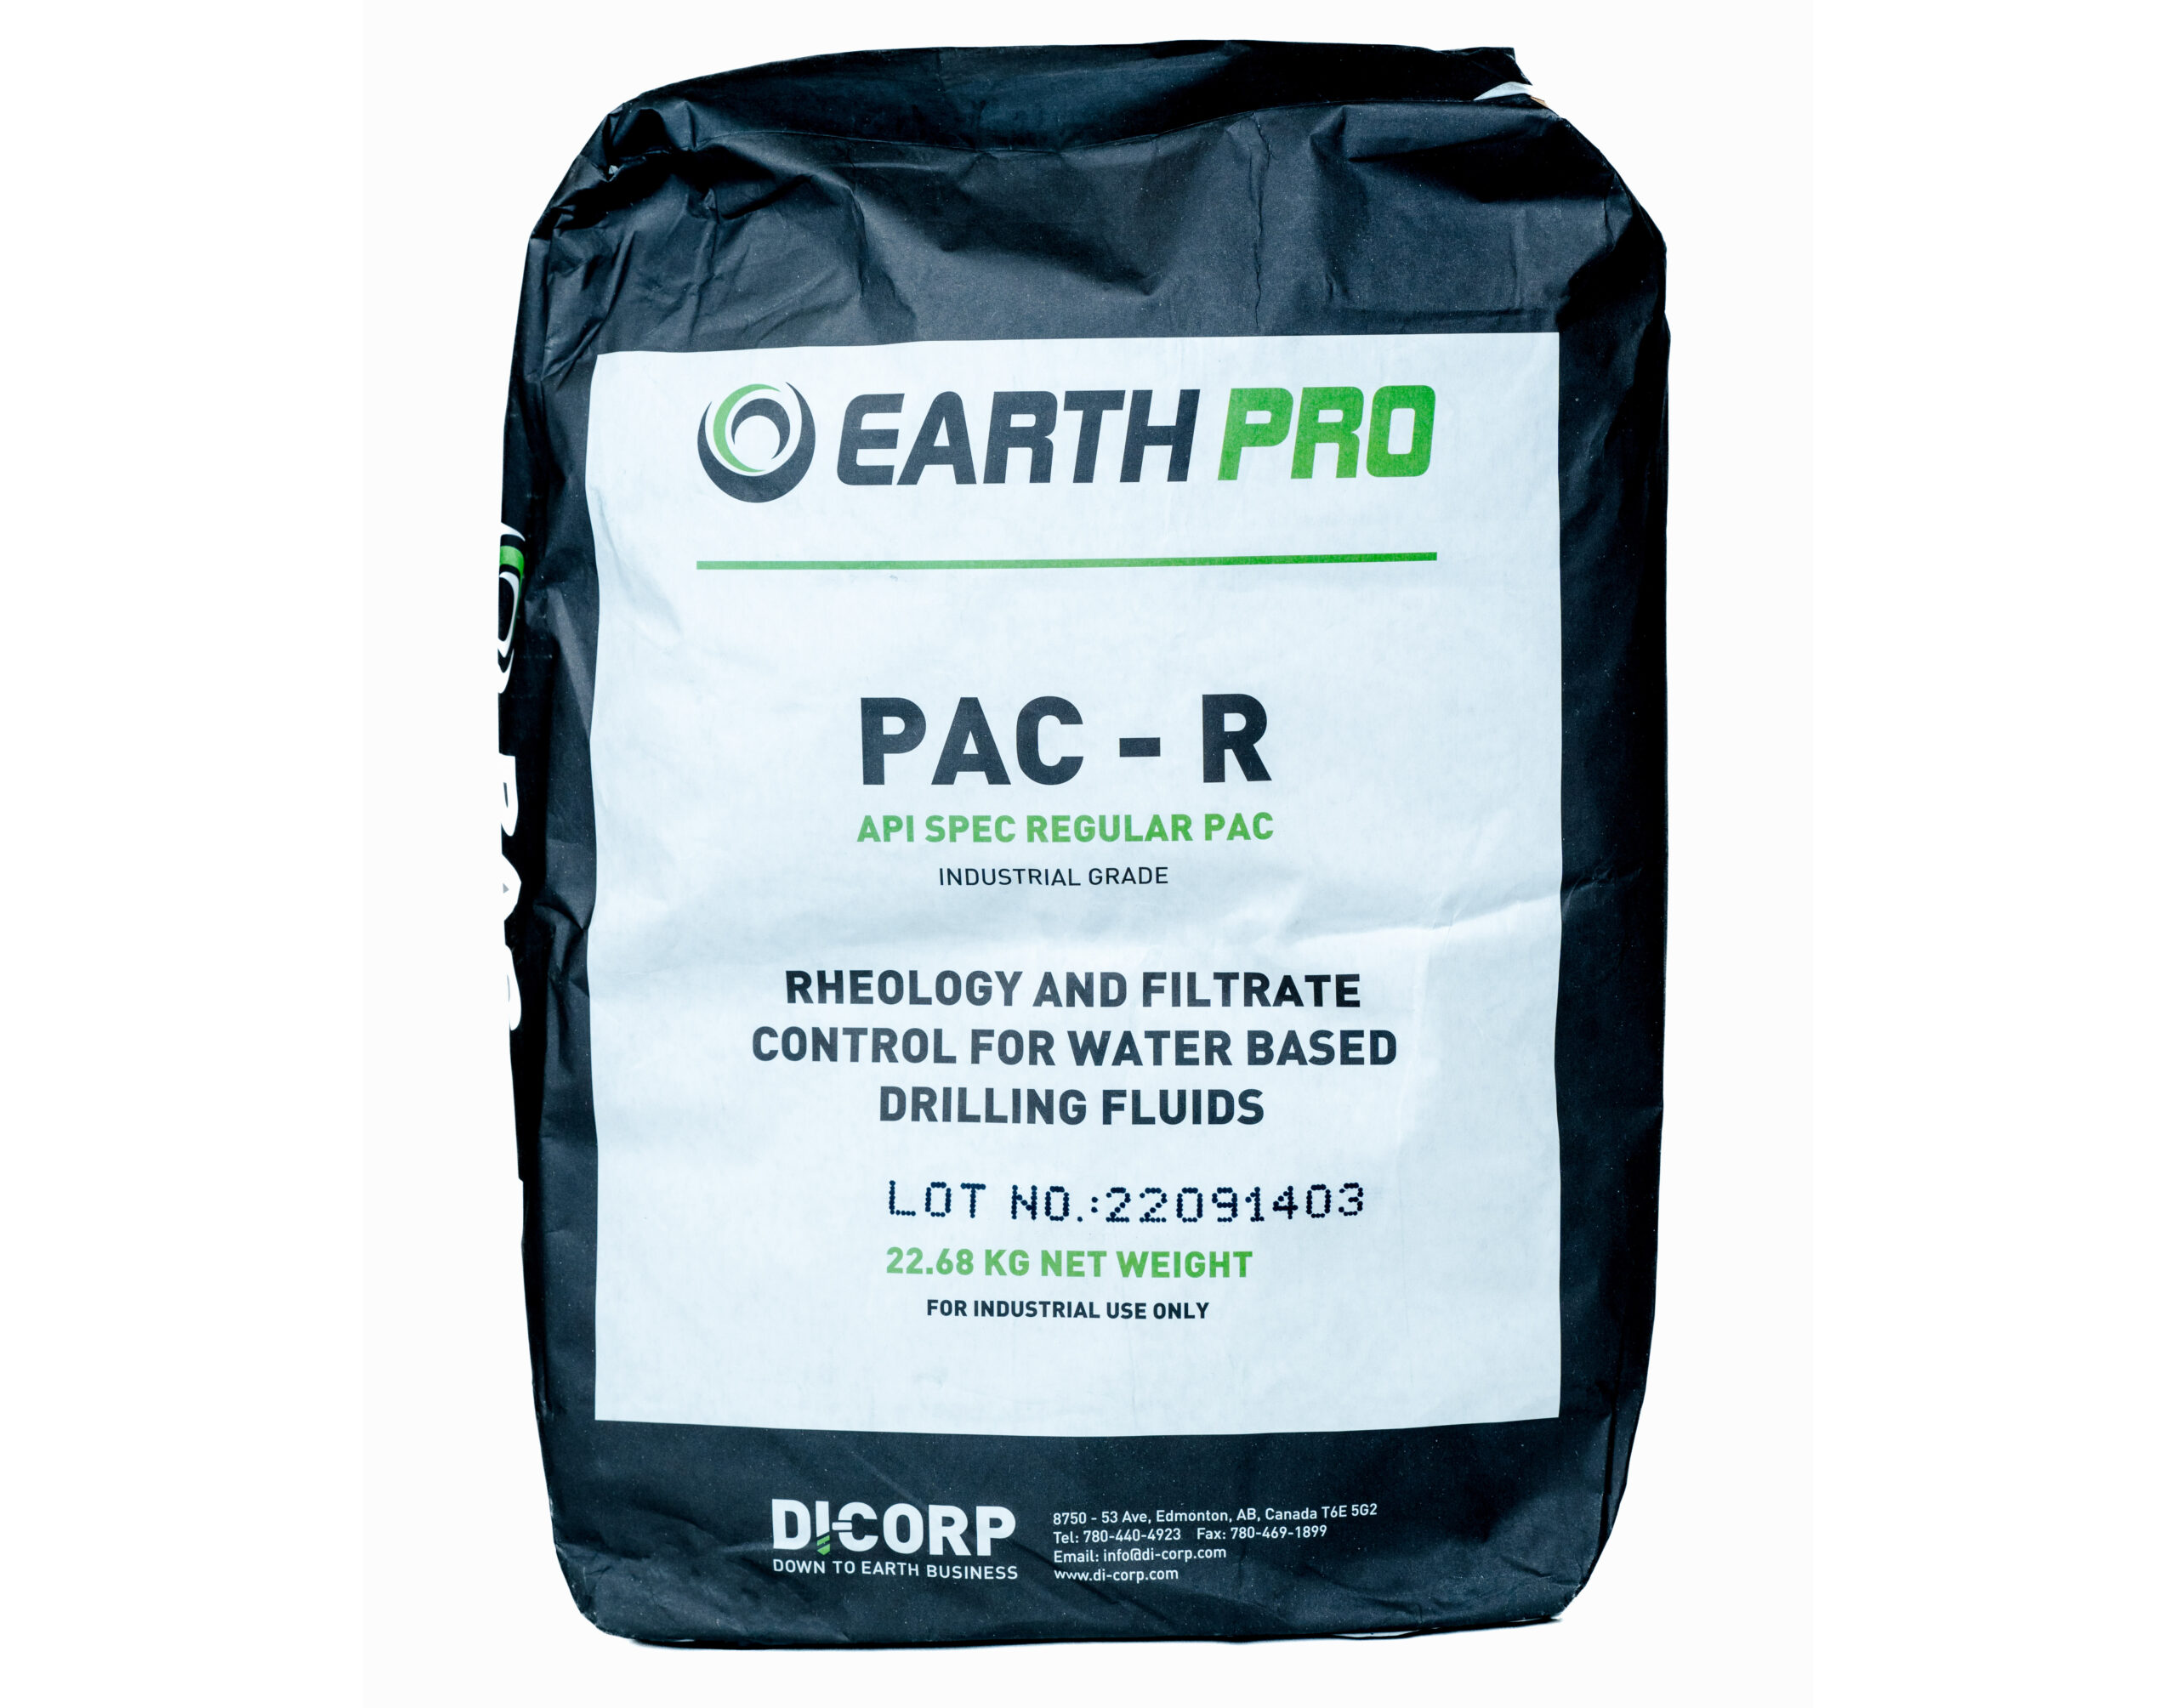 A bag of regular polyanionic cellulose polymer. The bag is black and has the text: “PAC-R API Spec Regular PAC. Industrial grade. Rheology and filtrate control for water-based drilling fluids. 22.68KG Net weight. For industrial use only.”